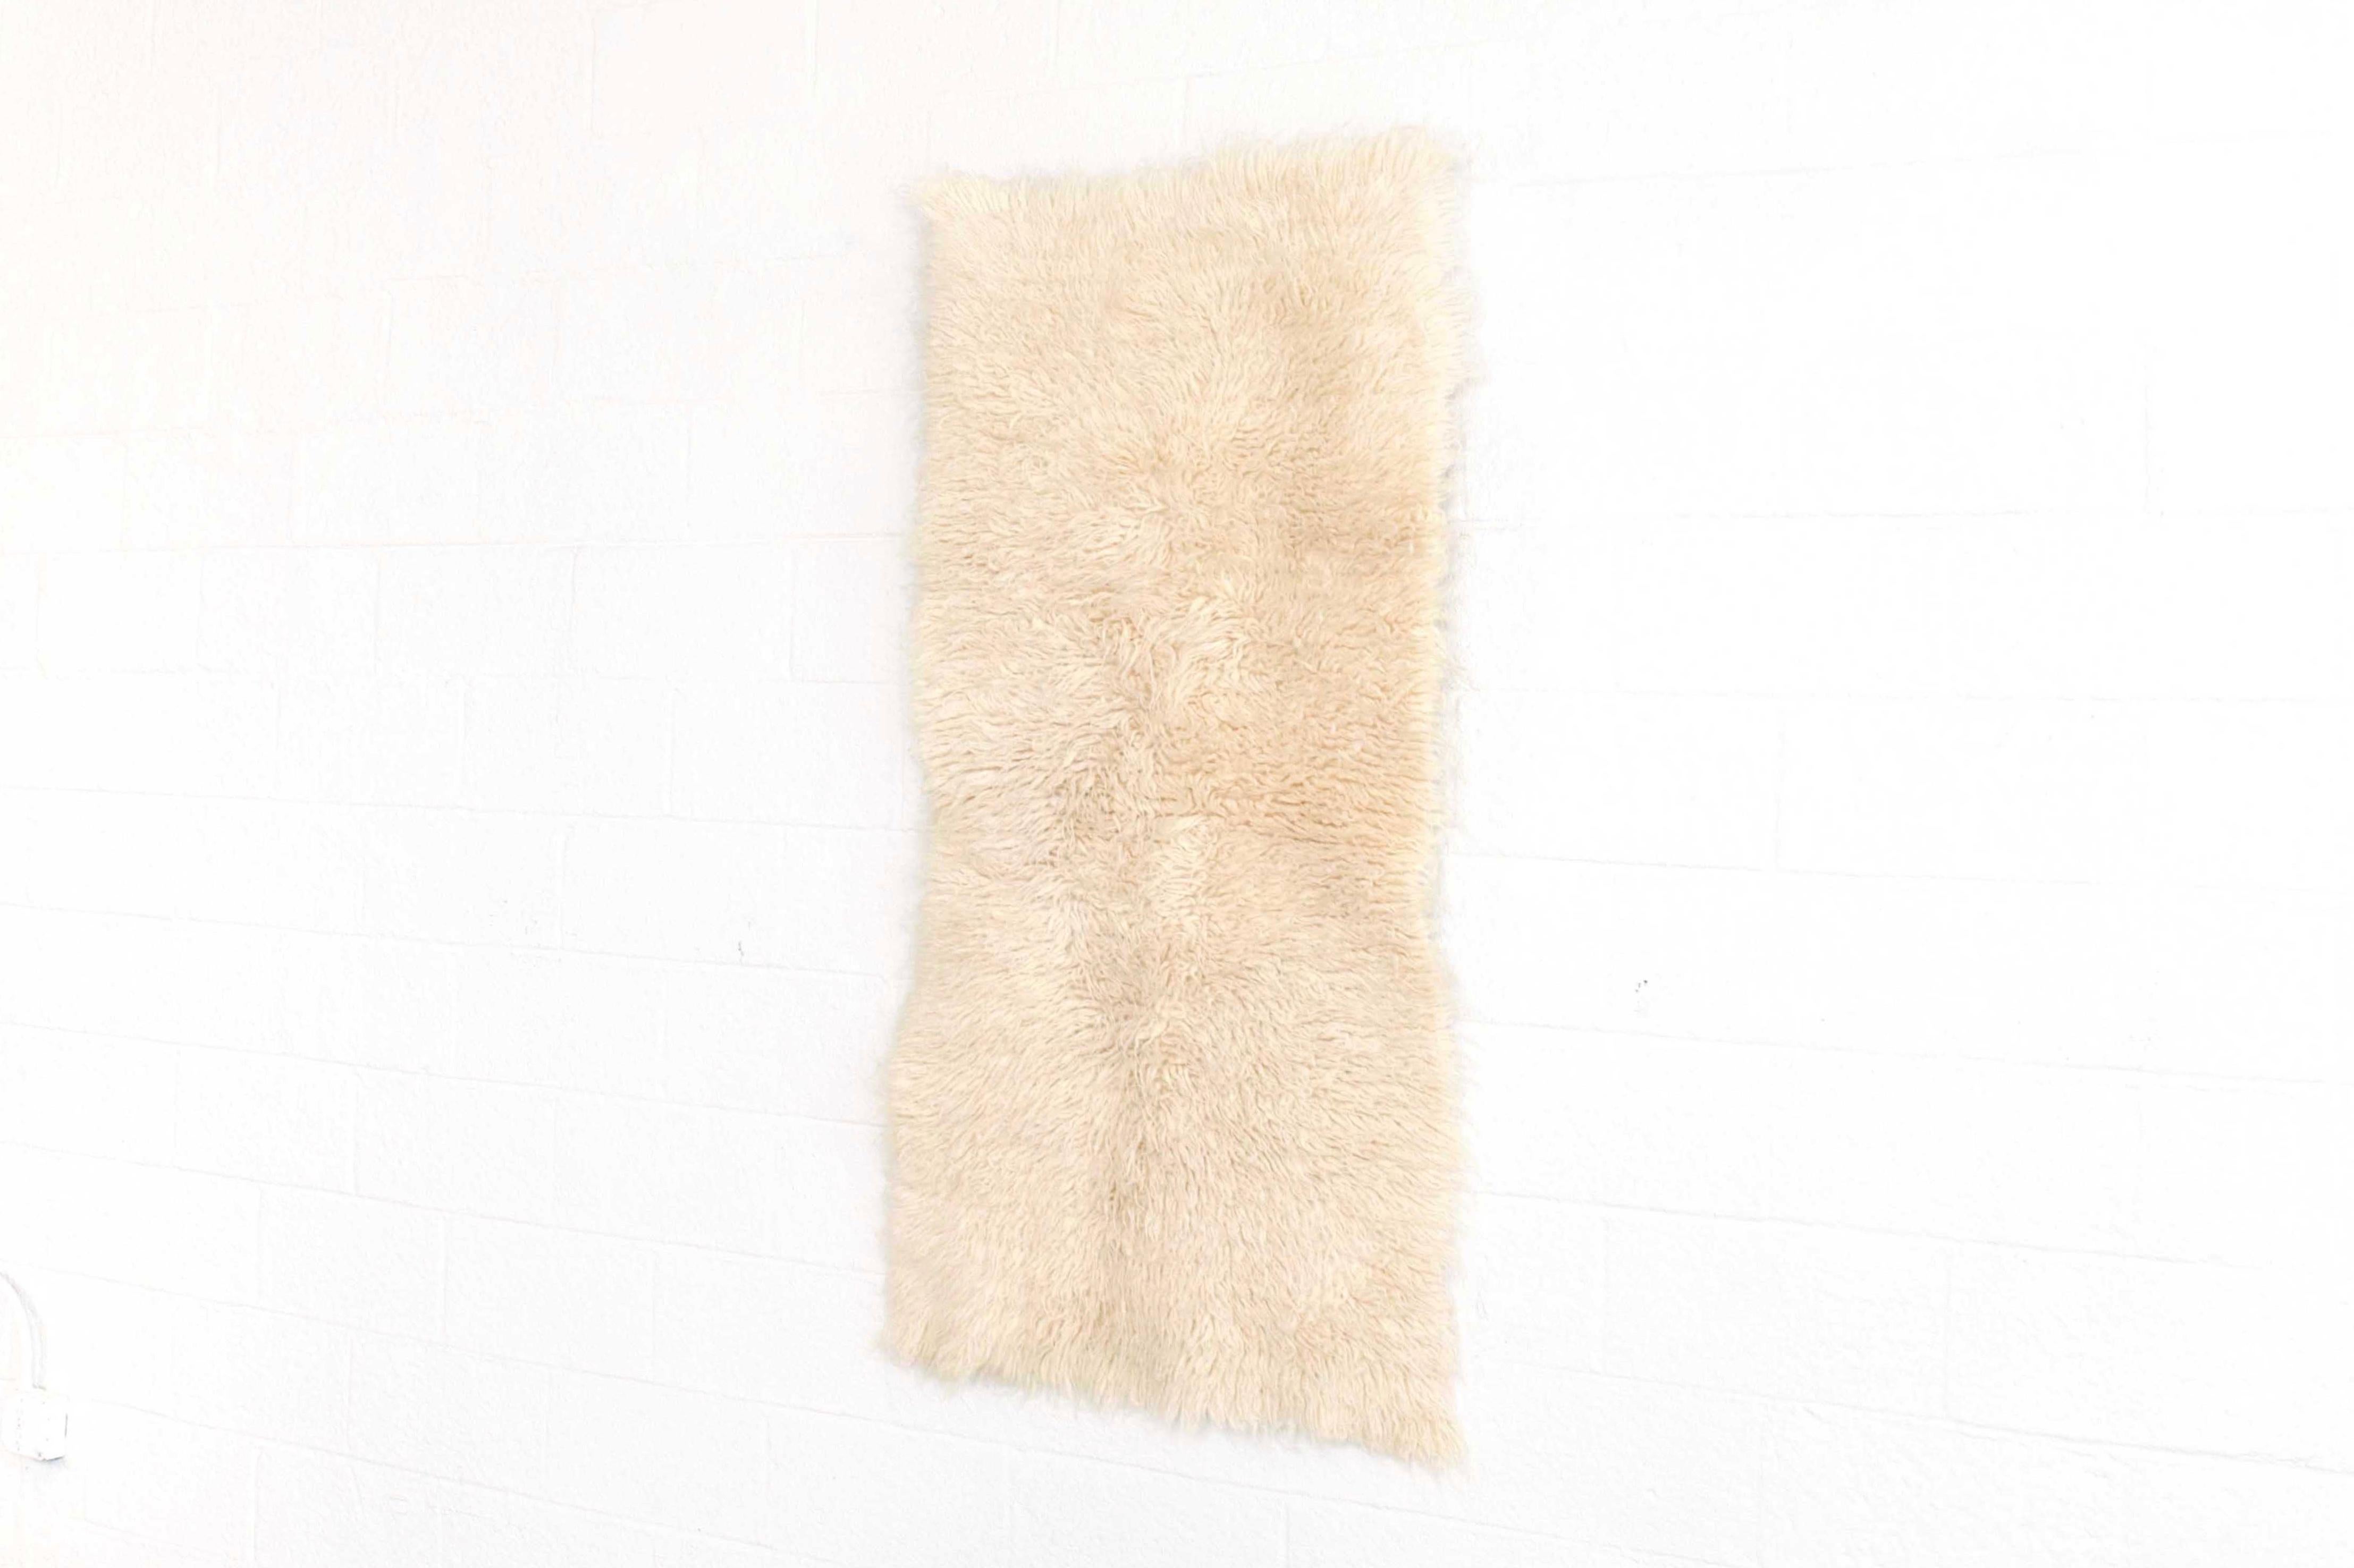 This small vintage wool shag rug circa 1960 is handwoven from 100% un-dyed wool and has a soft and luxurious thick shaggy pile. The clean, Minimalist design of this natural ivory carpet makes it the perfect accent for any contemporary style of